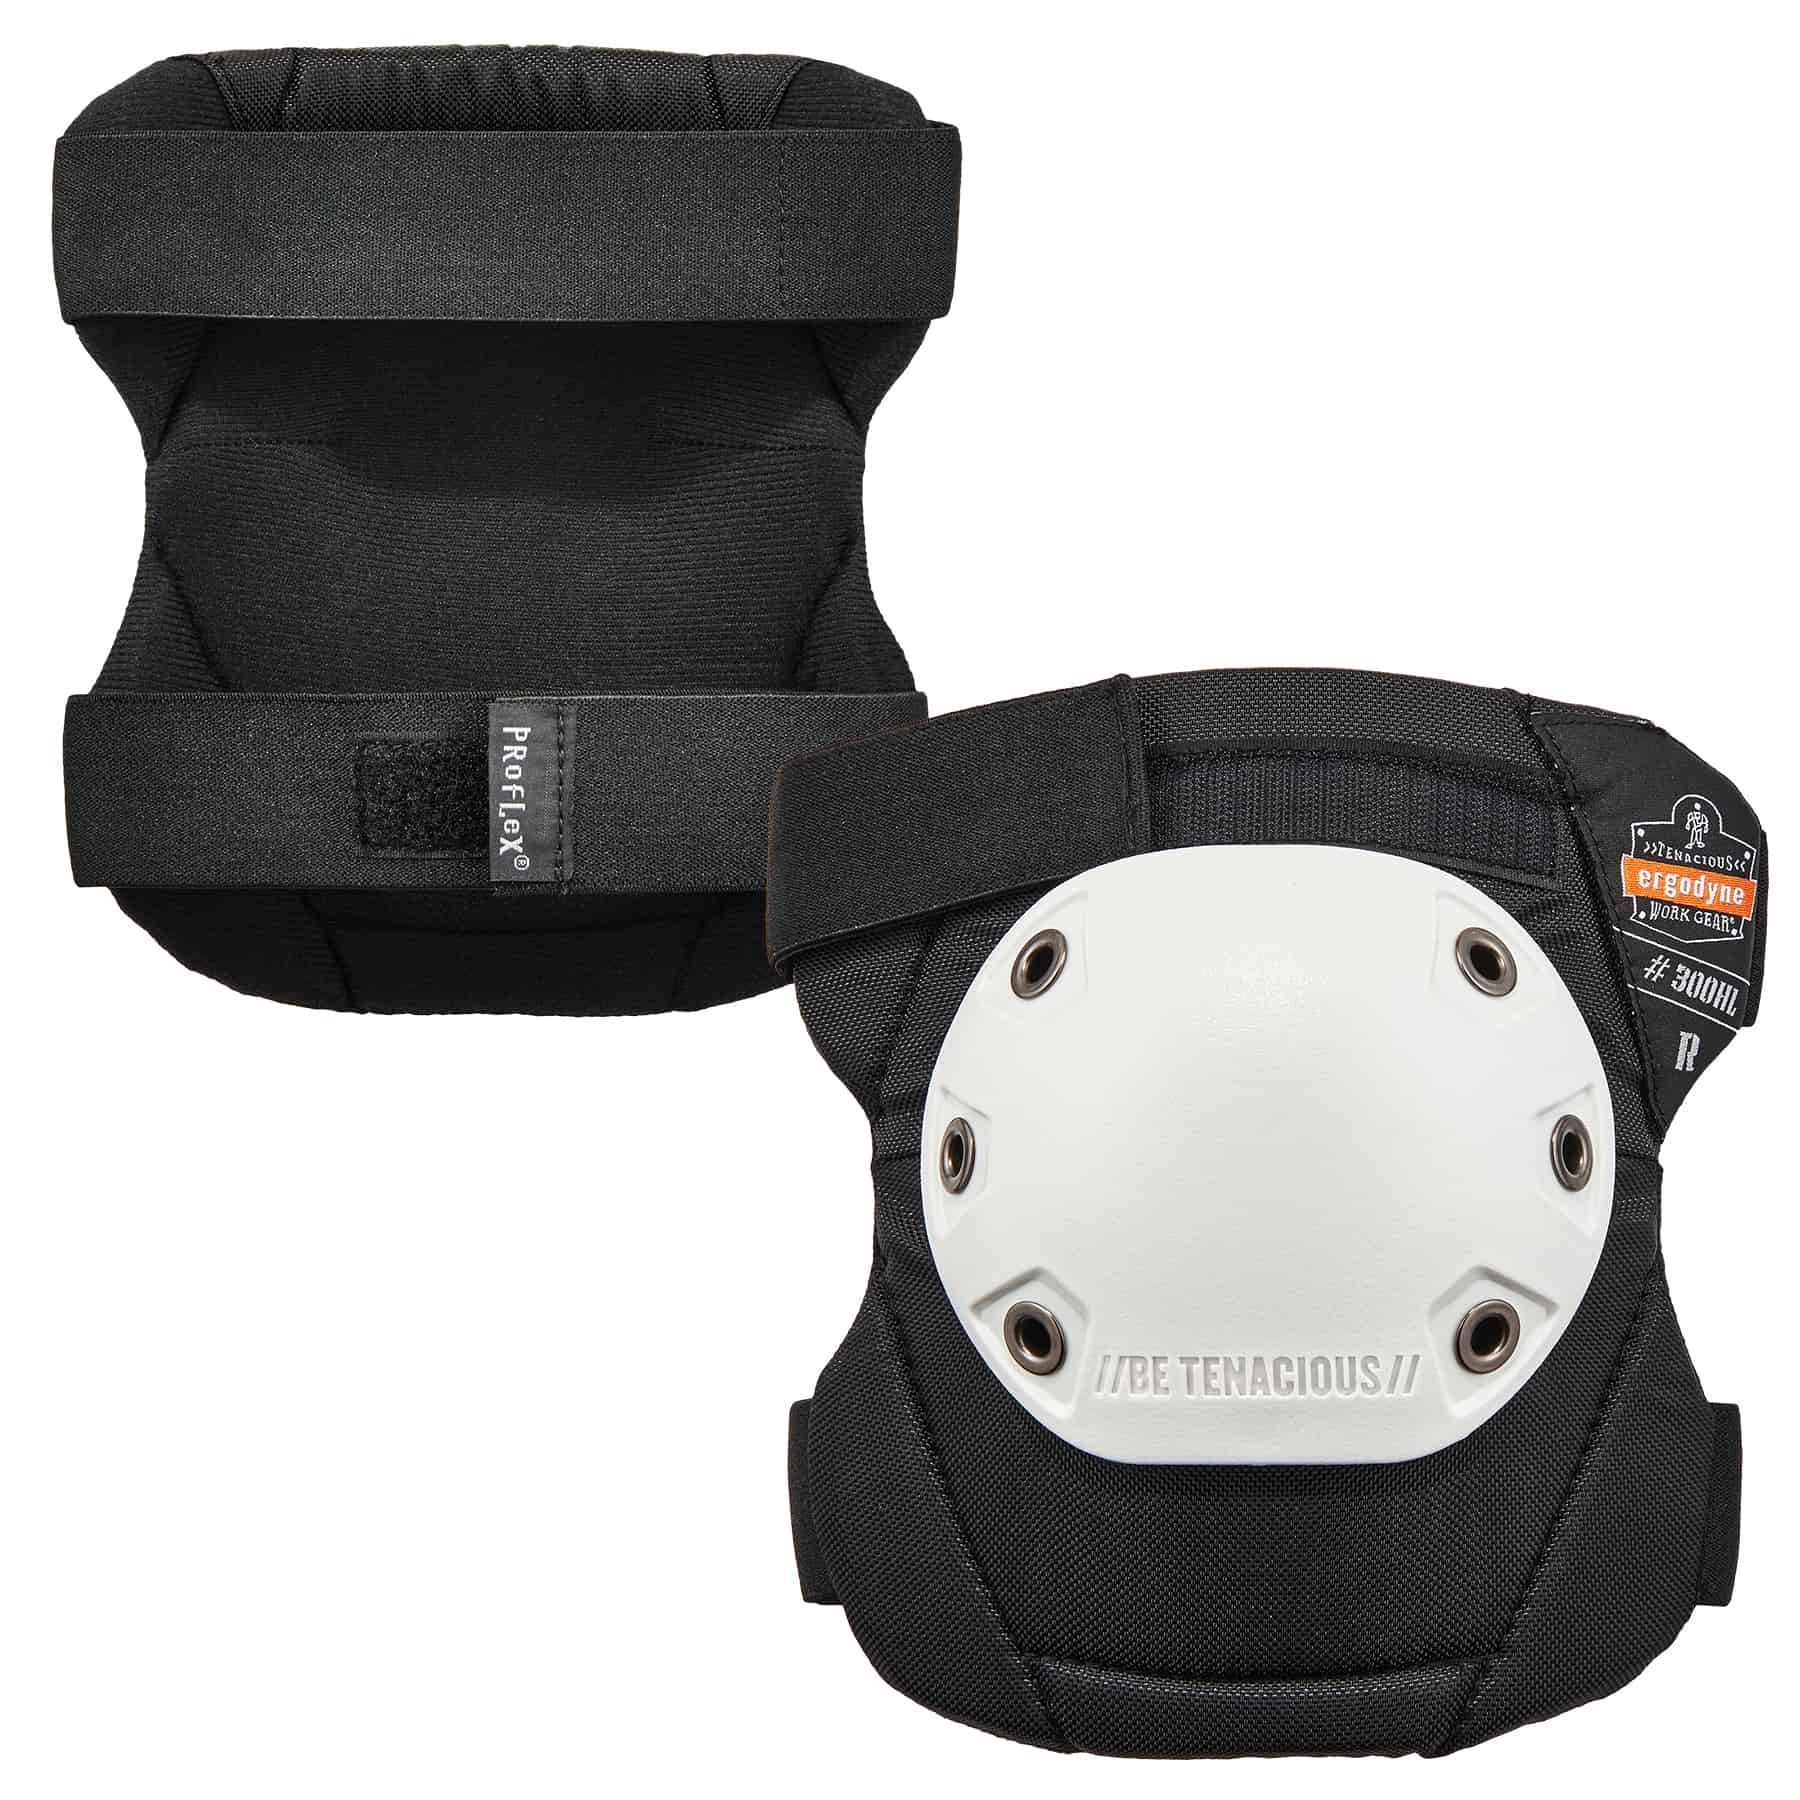 https://www.ergodyne.com/sites/default/files/product-images/18301-300hl-rounded-cap-knee-pads-paired.jpg